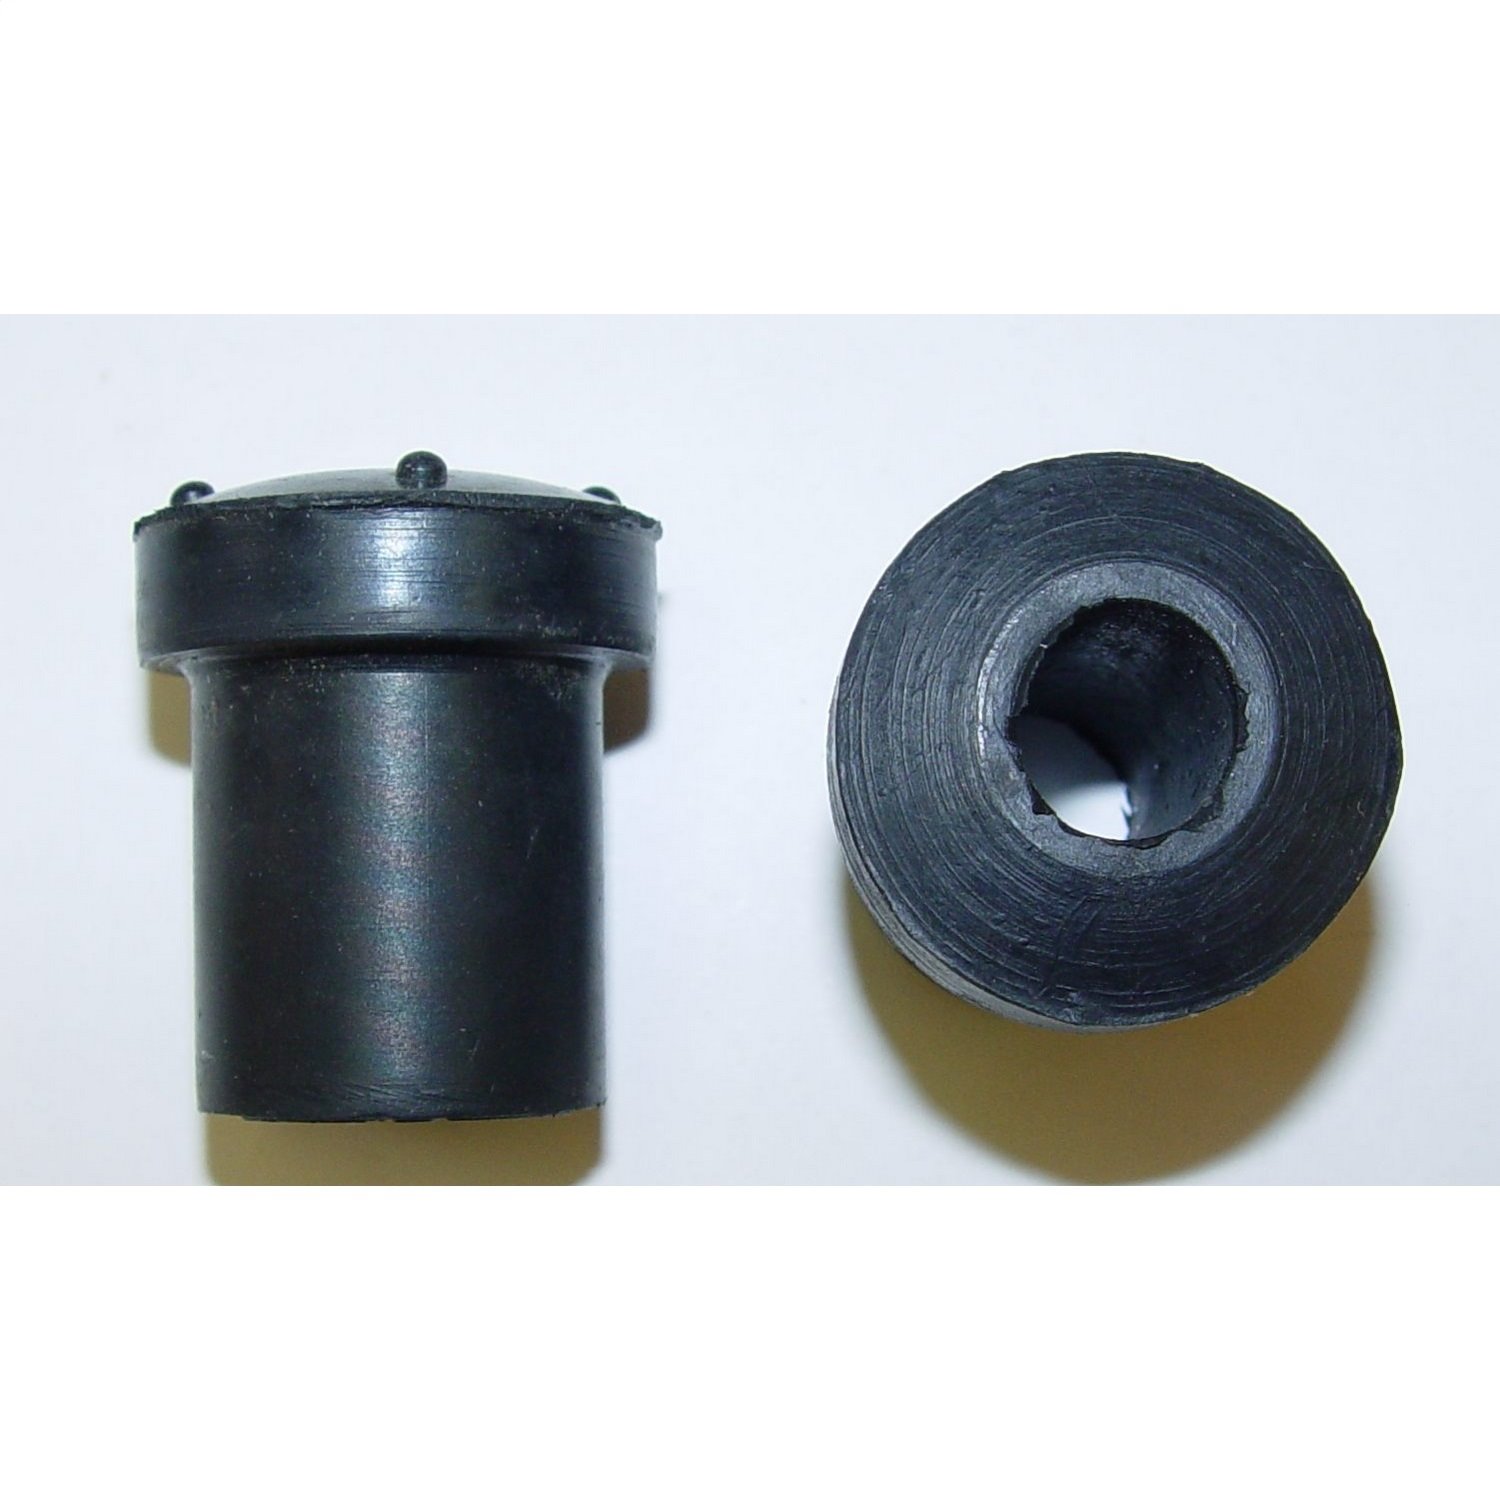 Replacement front leaf spring bushing from Omix-ADA, Fits 76-83 Jeep CJ5 76-86 CJ7 and 81-86 CJ8.. .